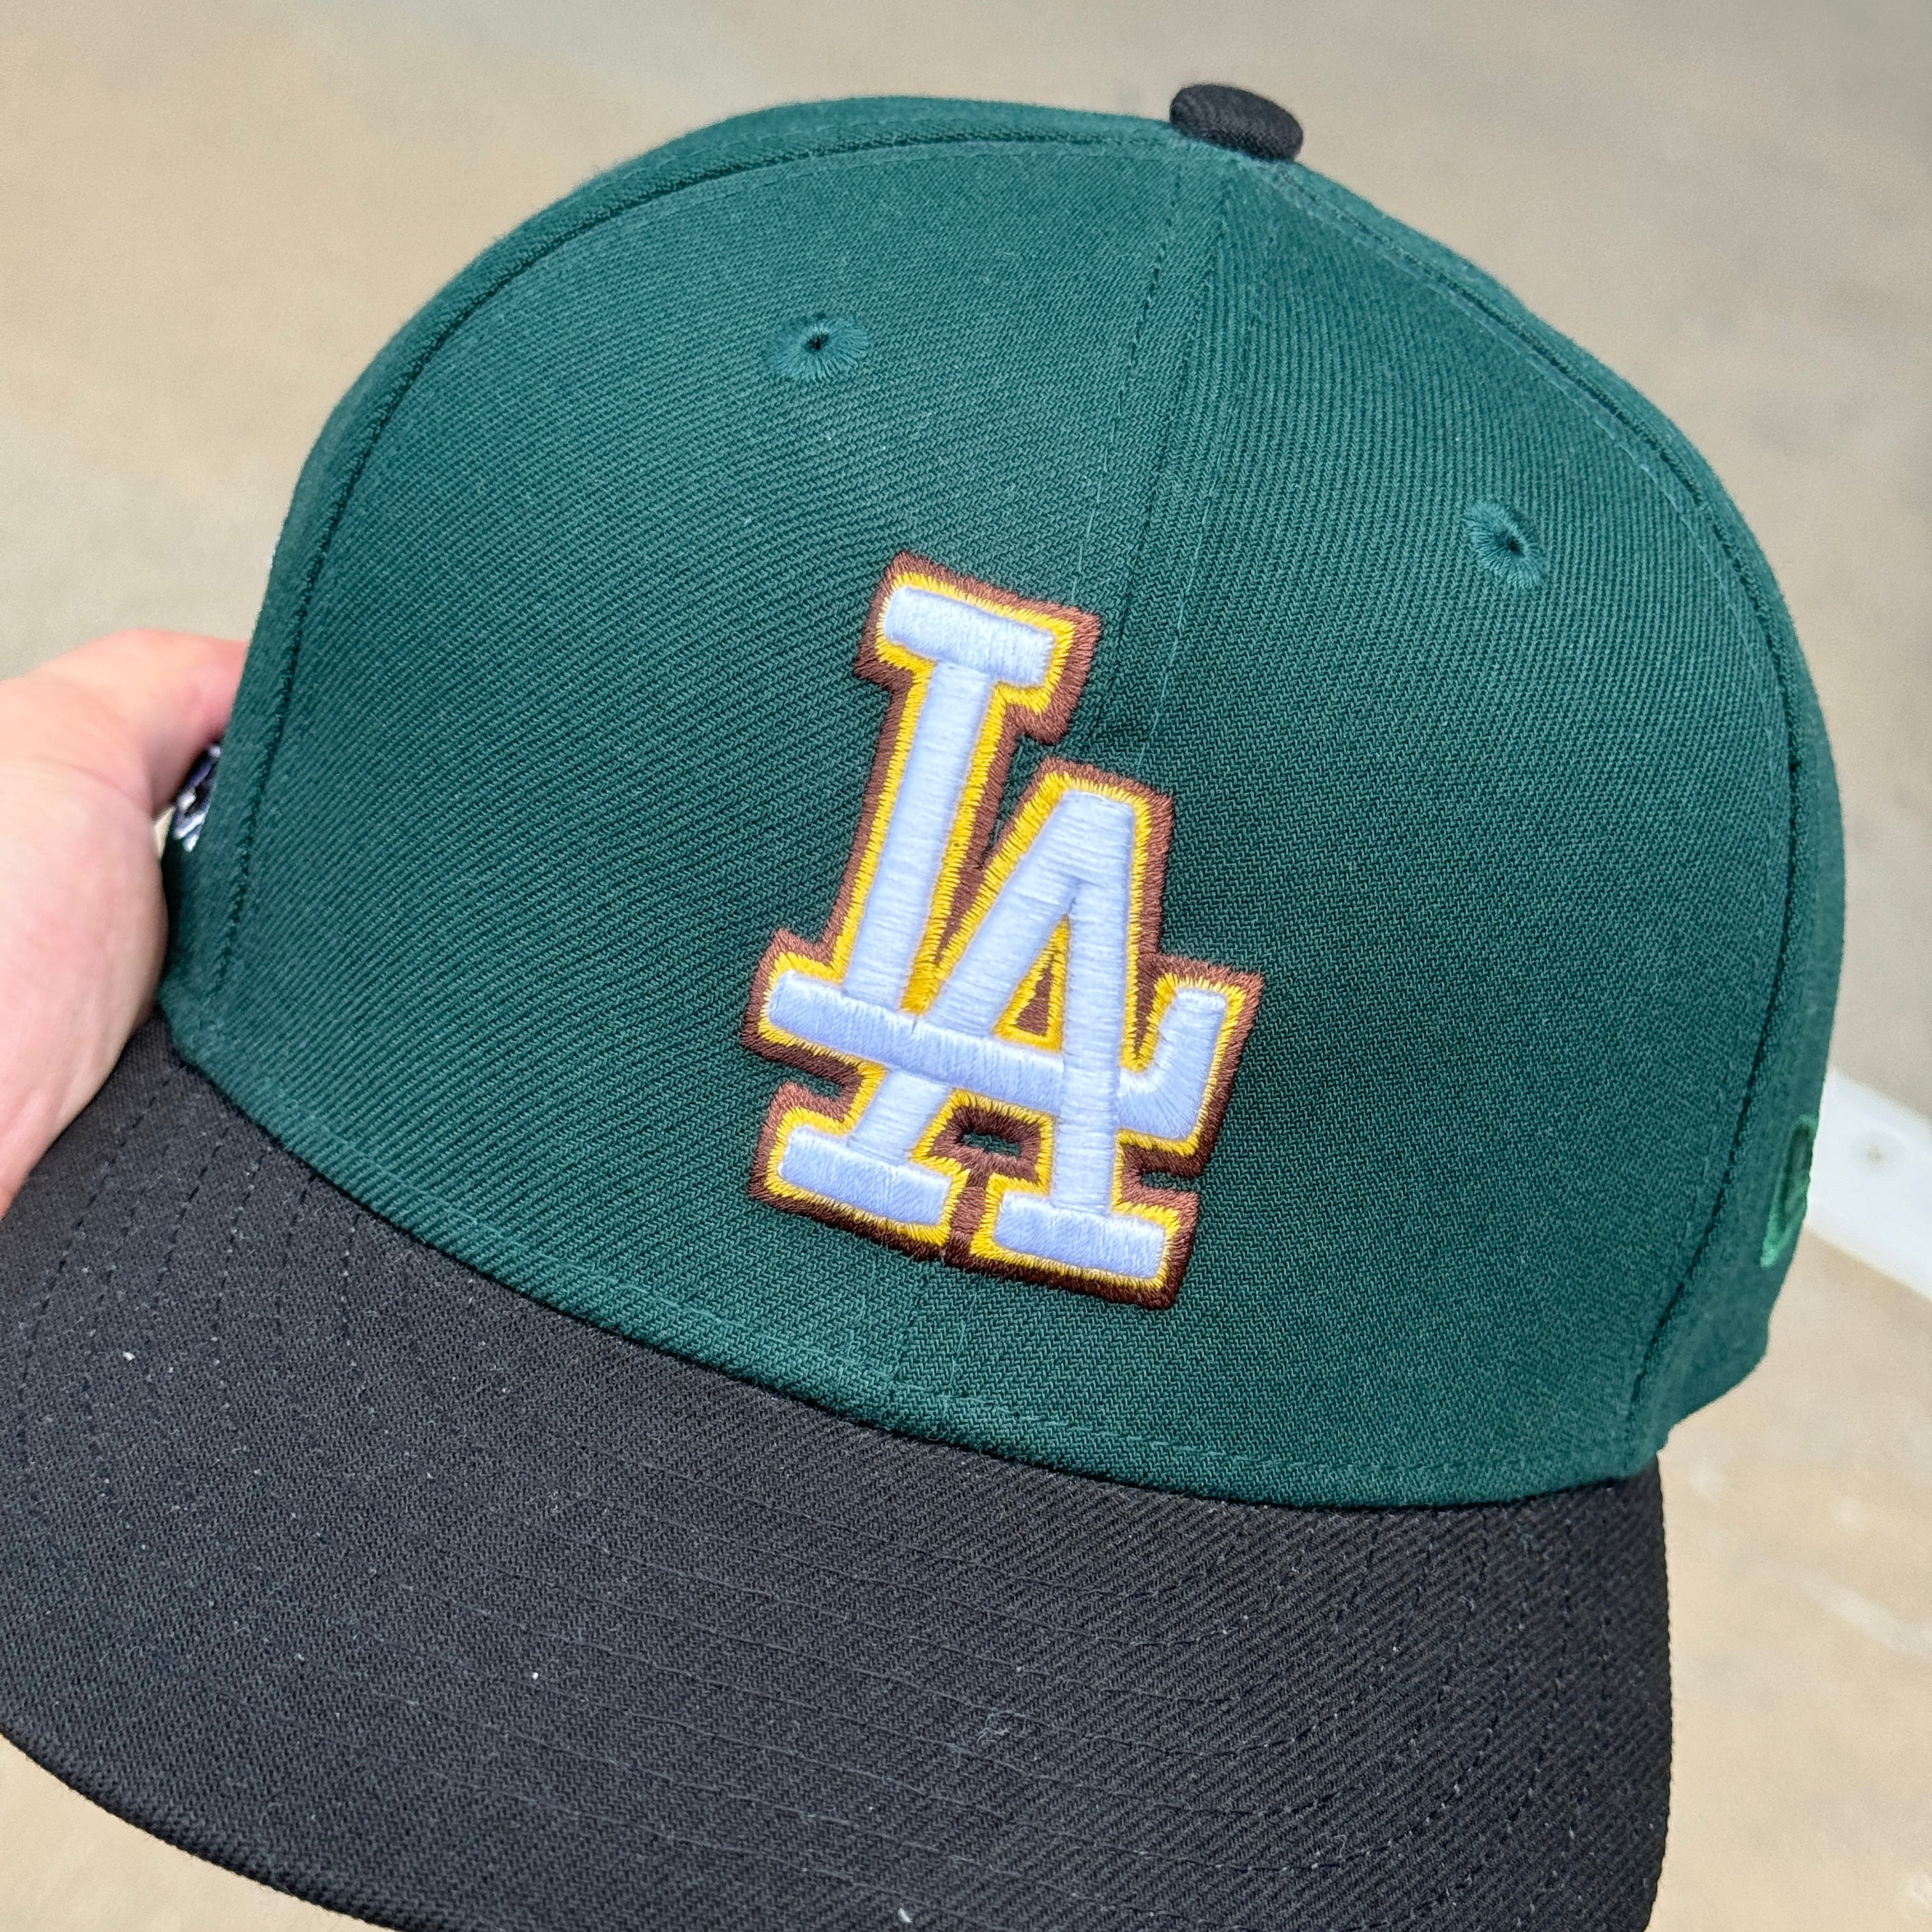 USED 1/2 Green Los Angeles Dodgers 40th Anniversary 59fifty New Era Fitted Hat Cap